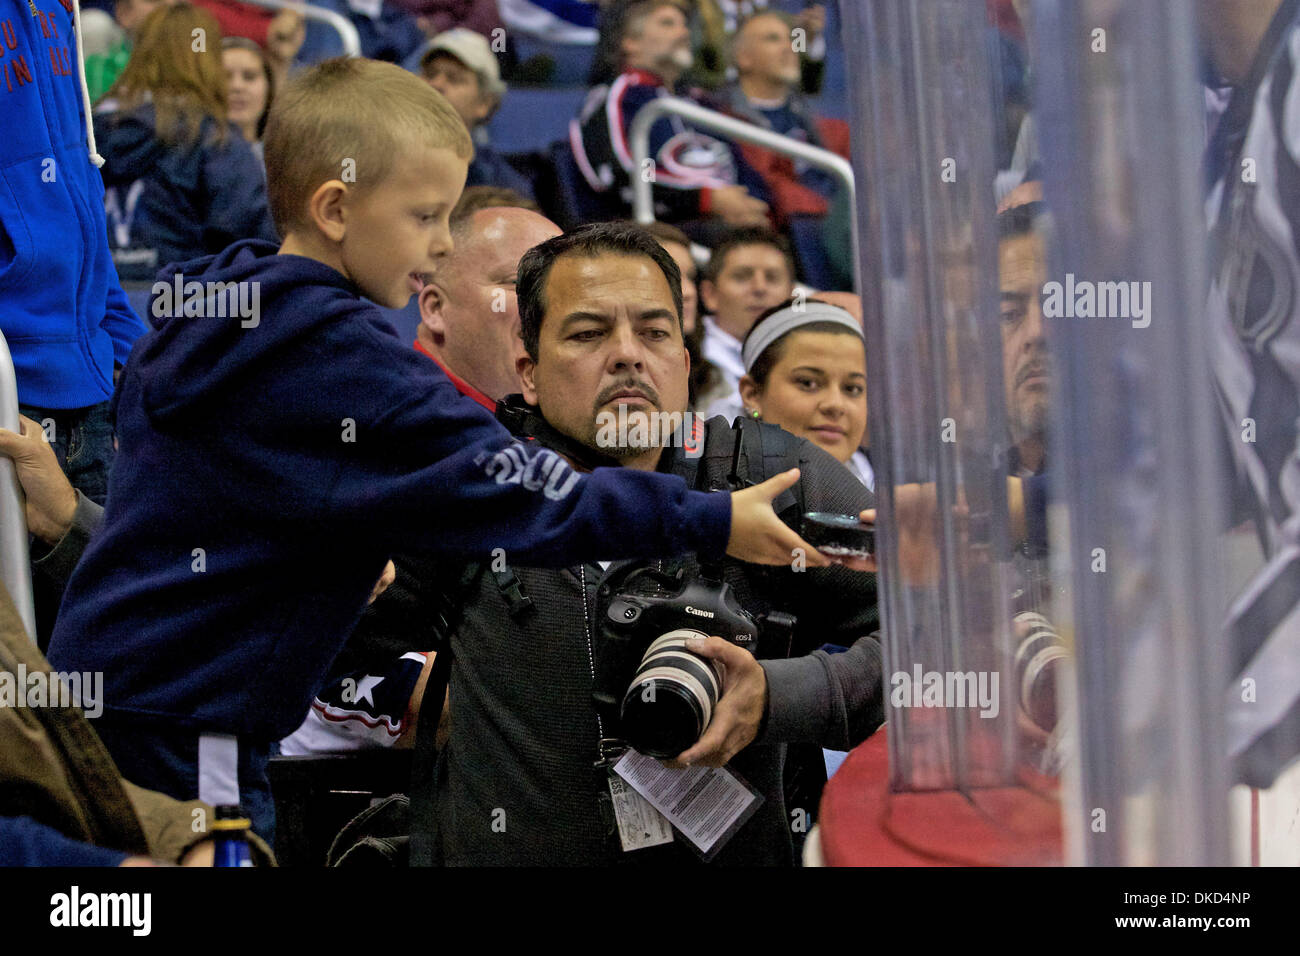 Nov. 3, 2011 - Columbus, Ohio, U.S - A Columbus Blue Jackets fan gets a puck passed to him through the glass by referee during the third period of the game between Toronto Maple Leafs and Columbus Blue Jackets at Nationwide Arena, Columbus, Ohio. Toronto defeated Columbus 4-1. (Credit Image: © Scott Stuart/Southcreek/ZUMAPRESS.com) Stock Photo